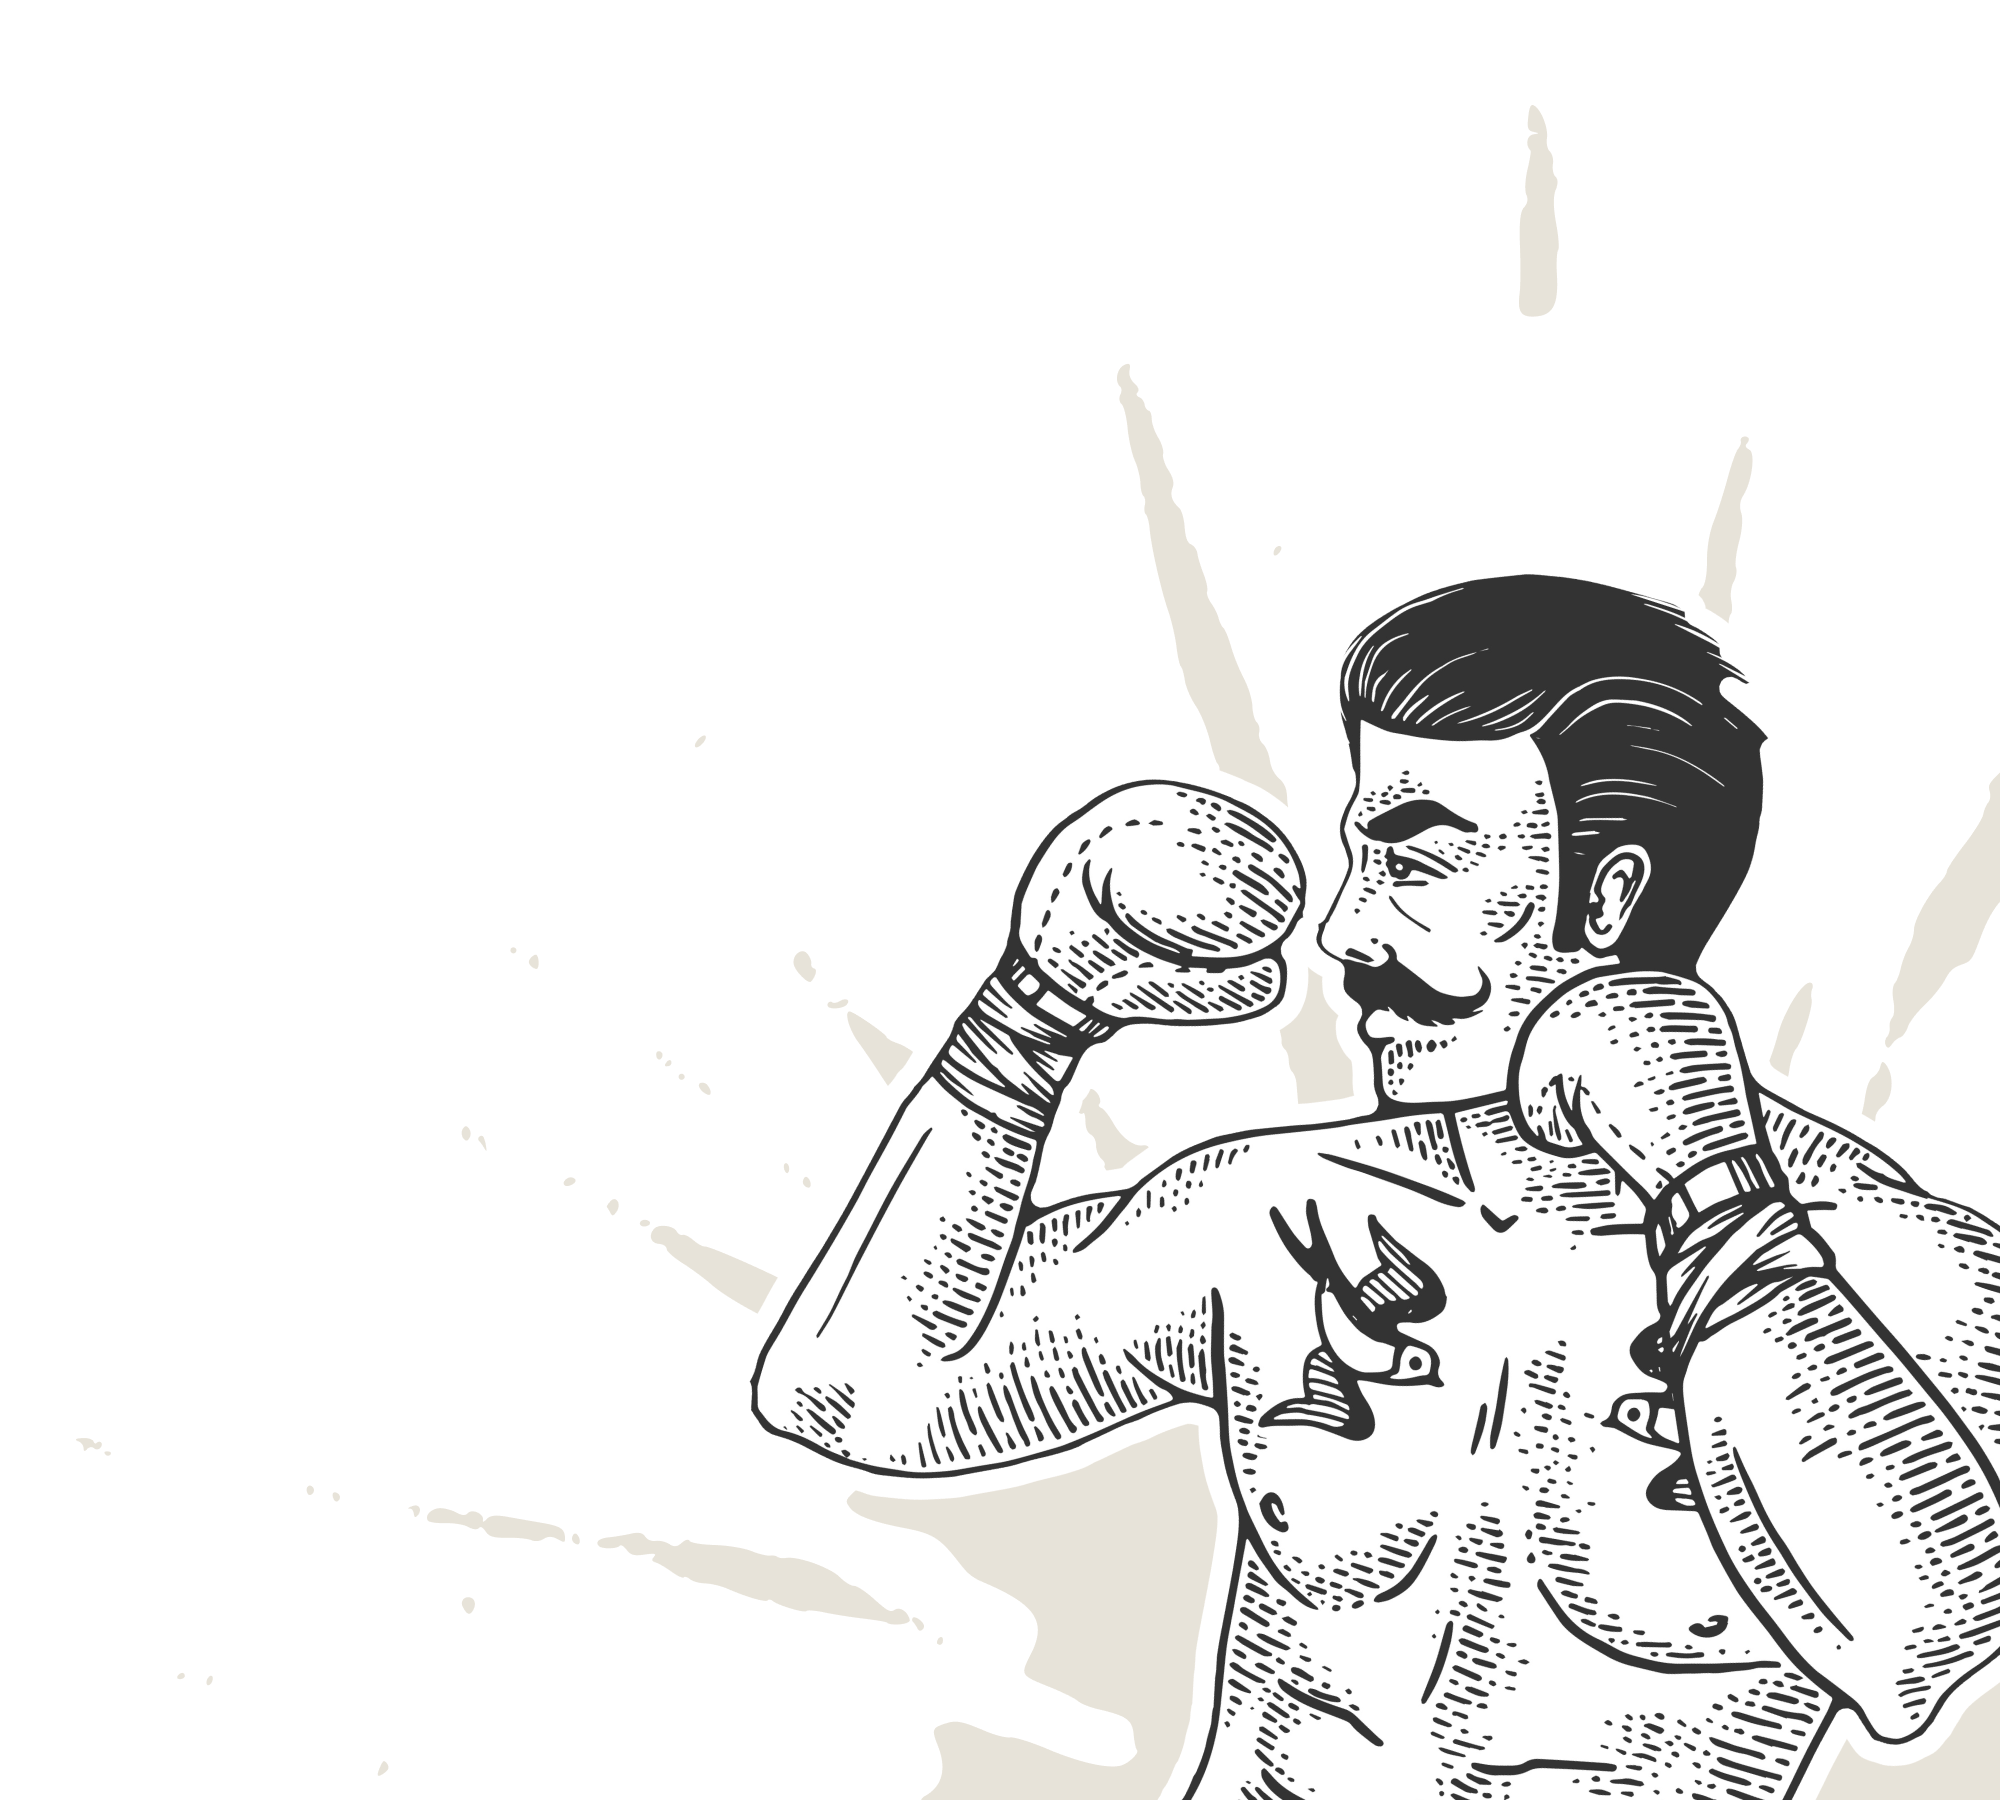 Illustrated boxer in a fighting pose